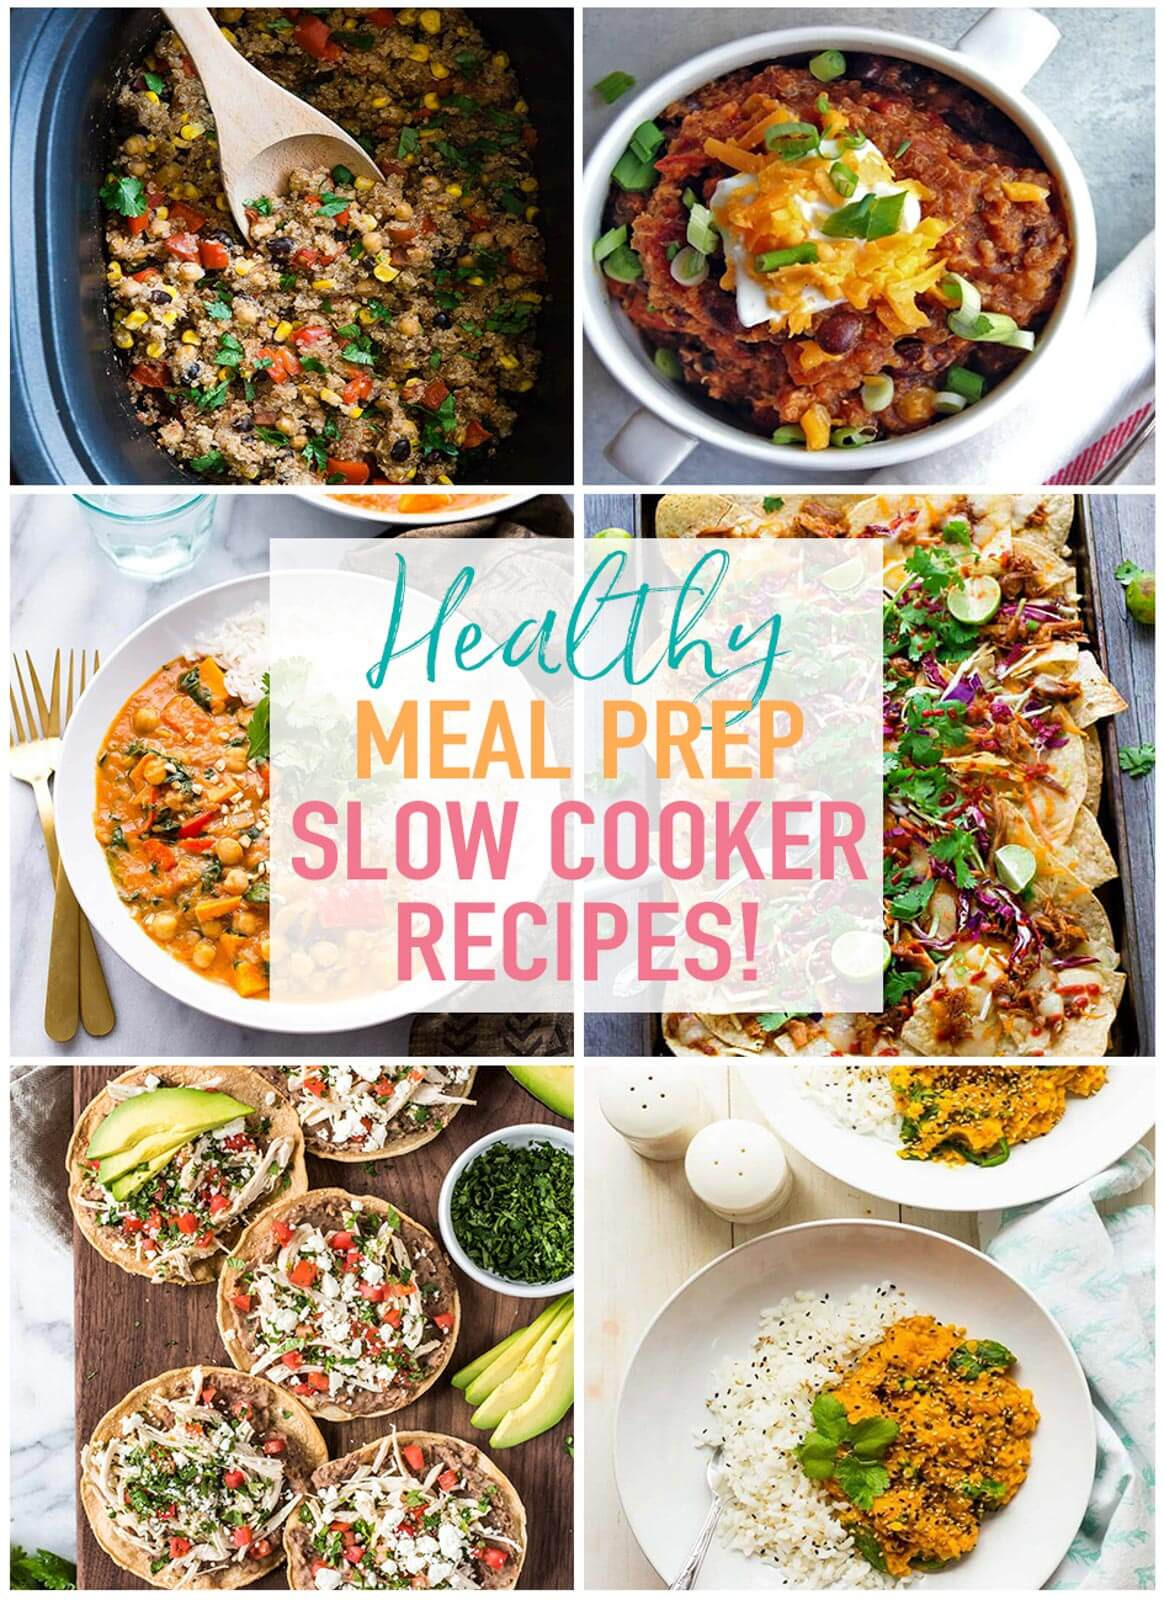 Healthy Slow Cooker Recipes for Two the 20 Best Ideas for Healthy Slow Cooker Recipes for Meal Prep the Girl On Bloor